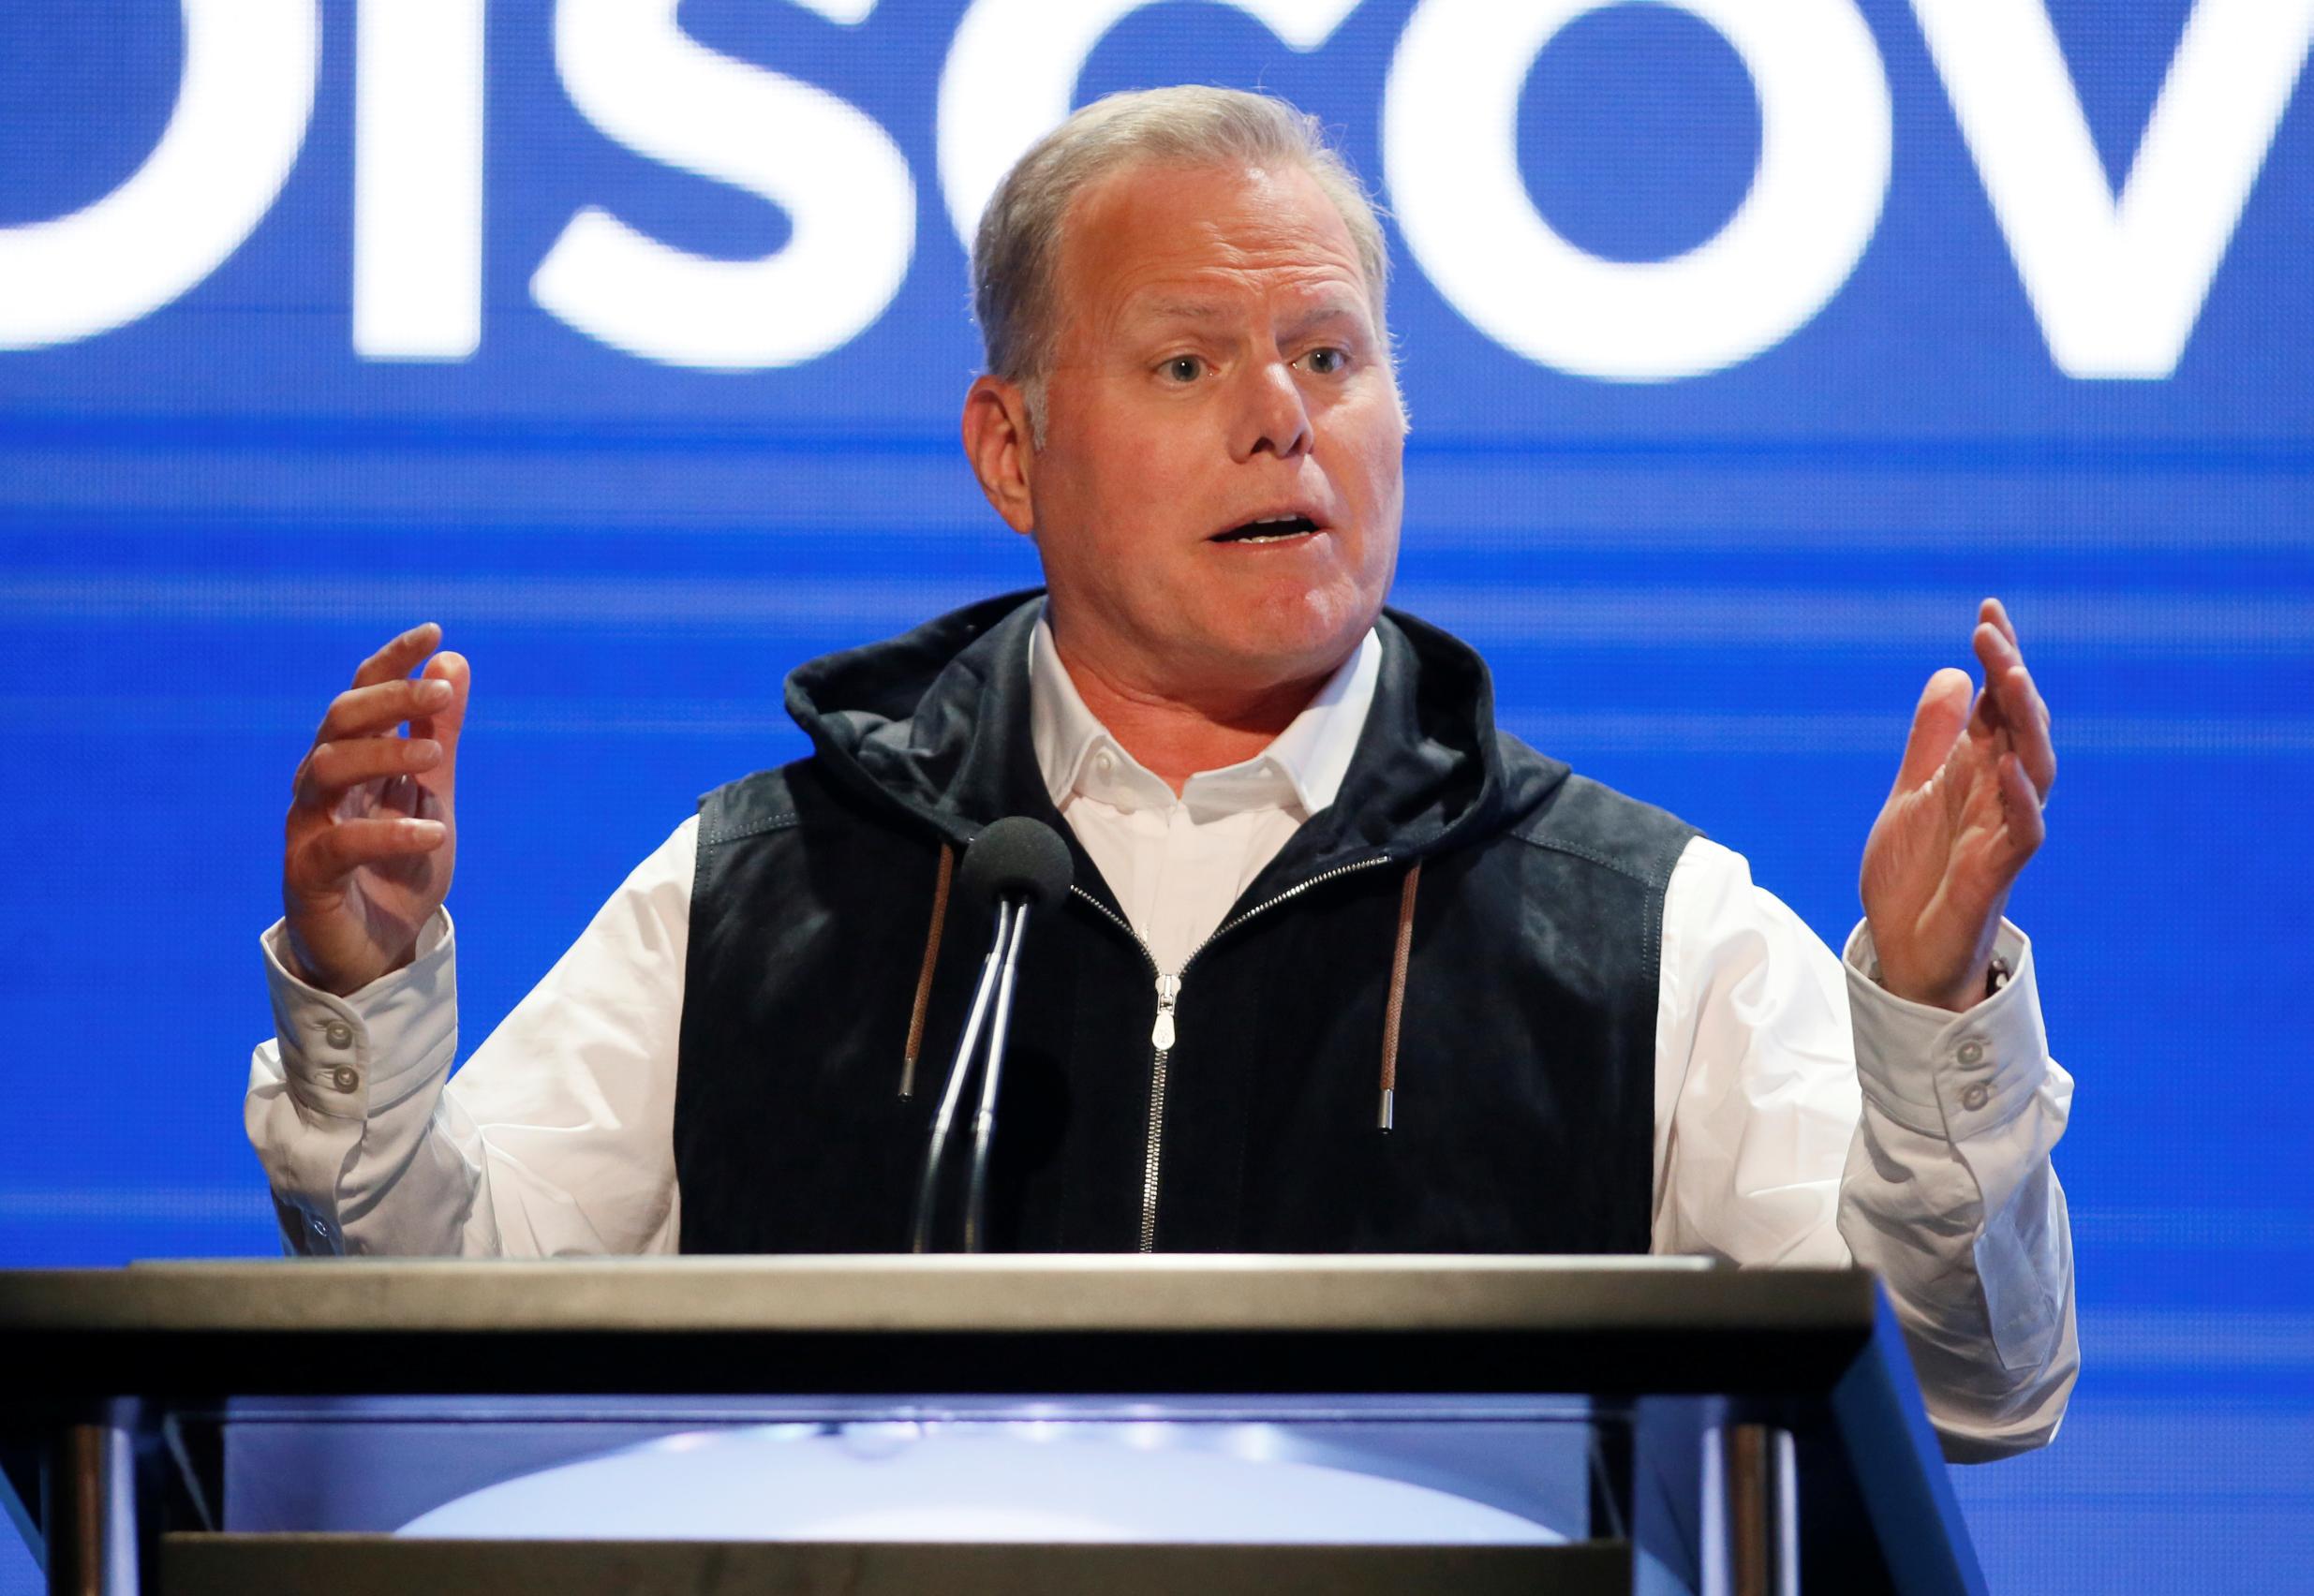 President and CEO of Discovery David Zaslav speaks during the Discovery portion of the Television Critics Association (TCA) Summer Press Tour in Beverly Hills, California, U.S., July 25, 2019. REUTERS/Danny Moloshok